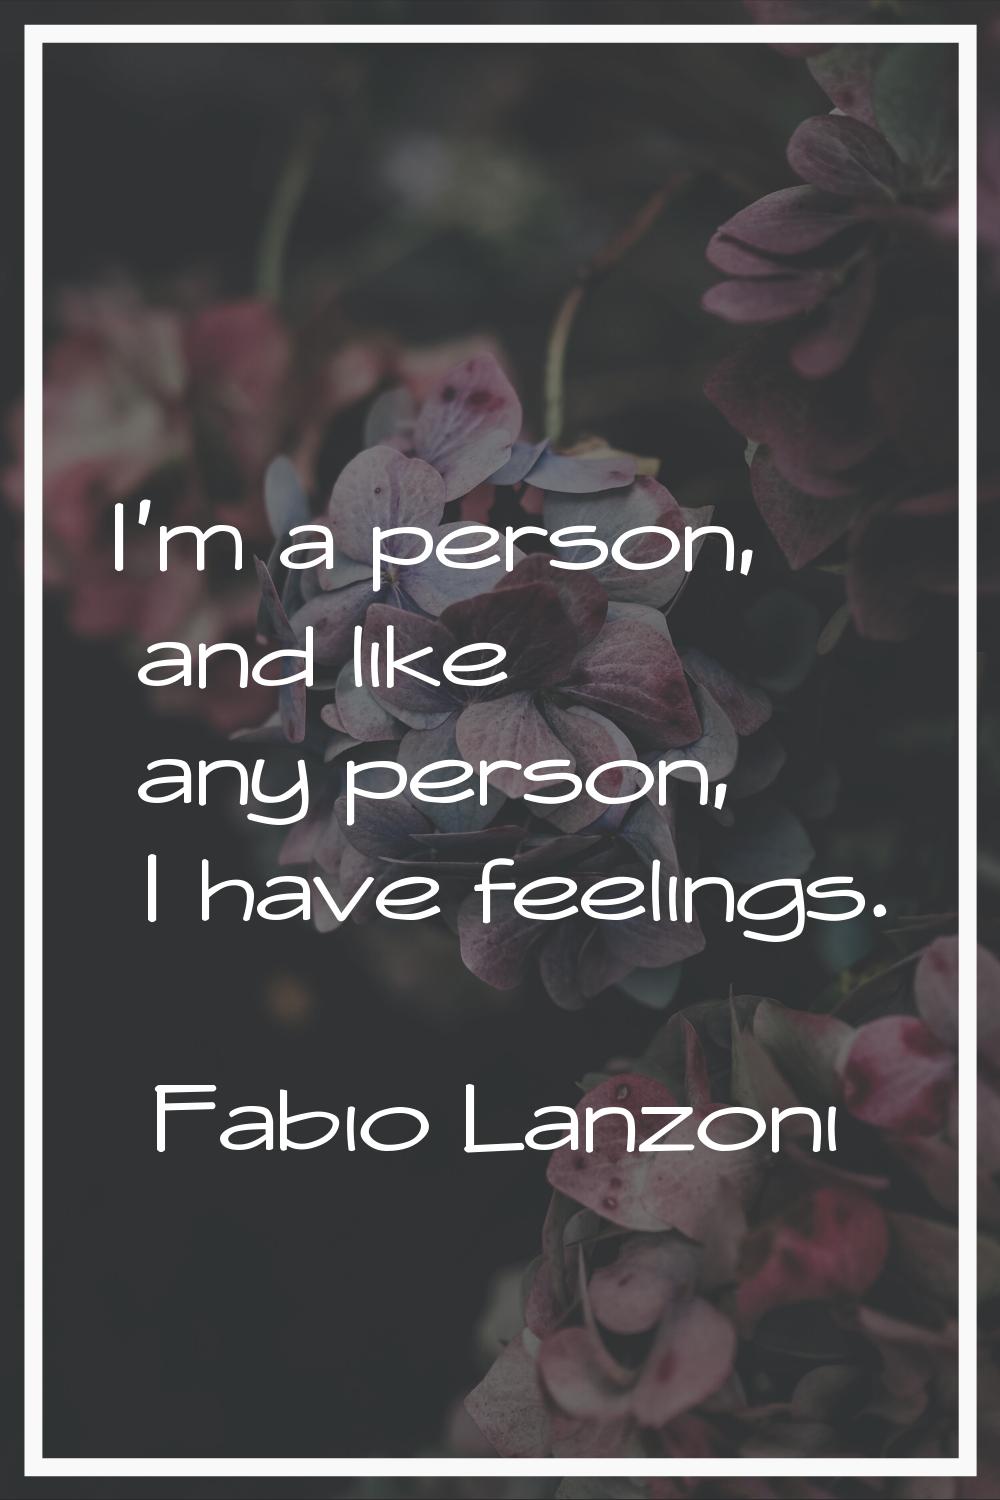 I'm a person, and like any person, I have feelings.